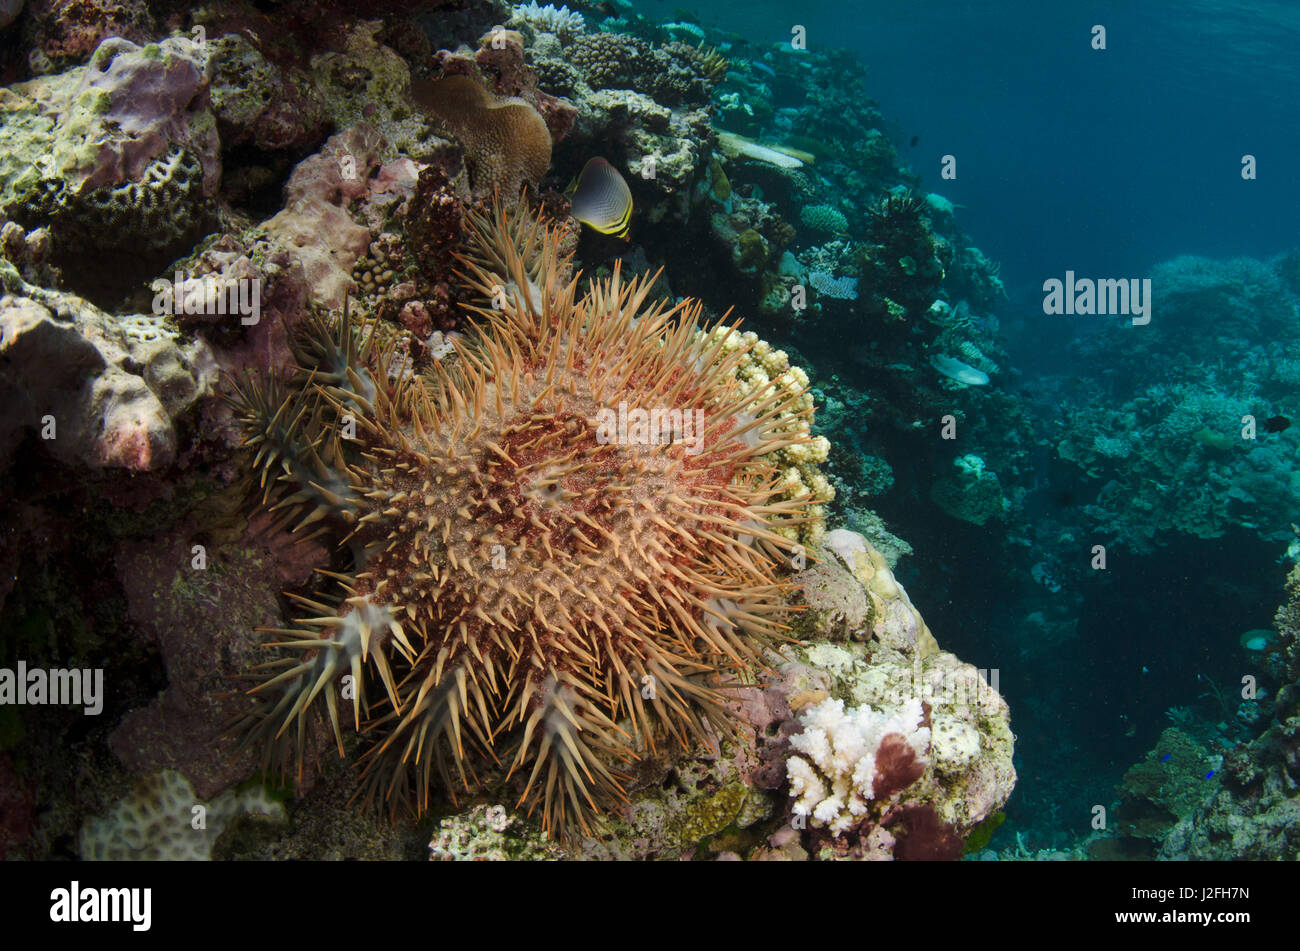 Crown-of-Thorns Sea Star (Acanthaster planci), on coral reef, Fiji, Can be very damaging to coral reefs Stock Photo